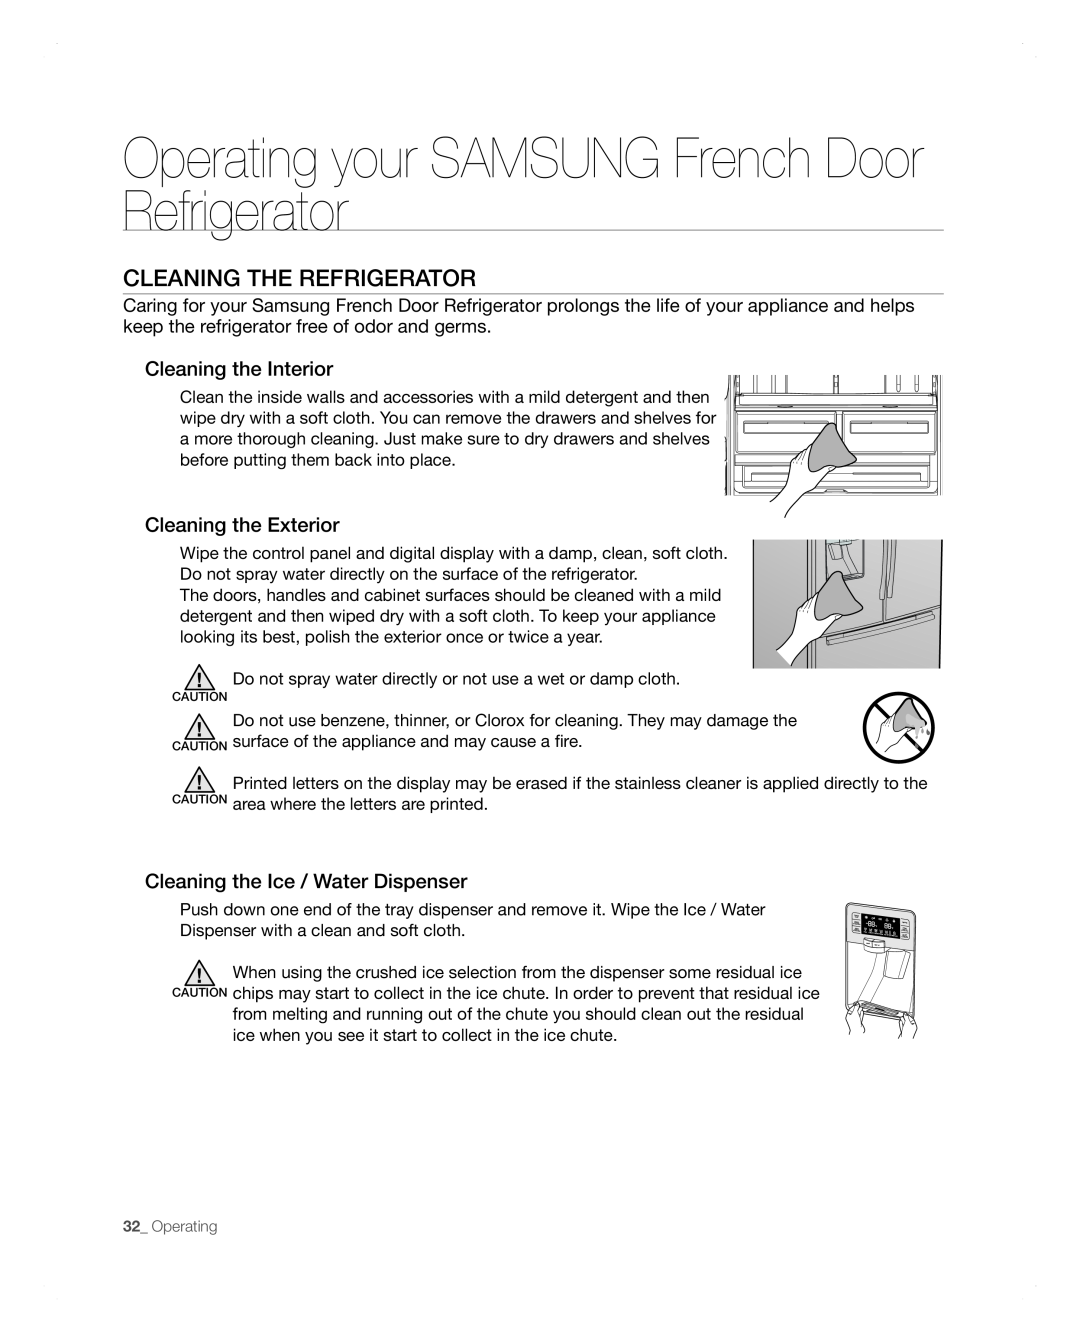 Samsung RFG297AARS Cleaning the refrigerator, Operating your SAMSUNG French Door Refrigerator, Cleaning the Interior 